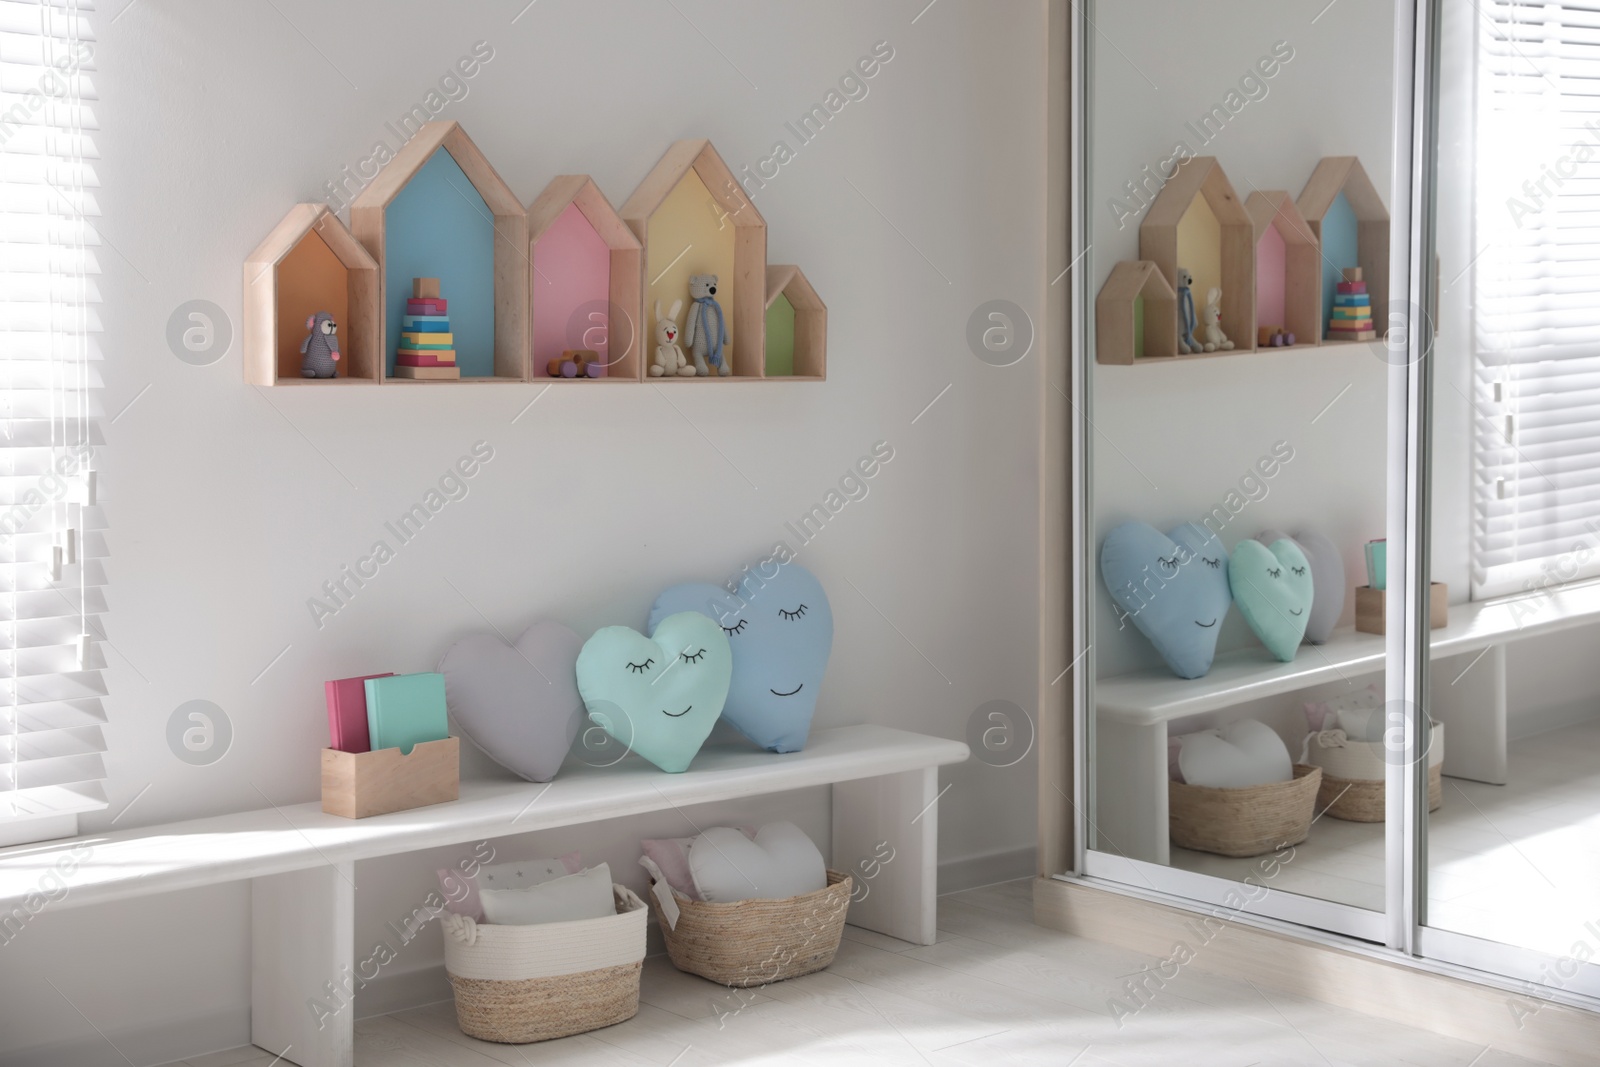 Photo of Cute children's room interior design with house shaped shelves on white wall and bench